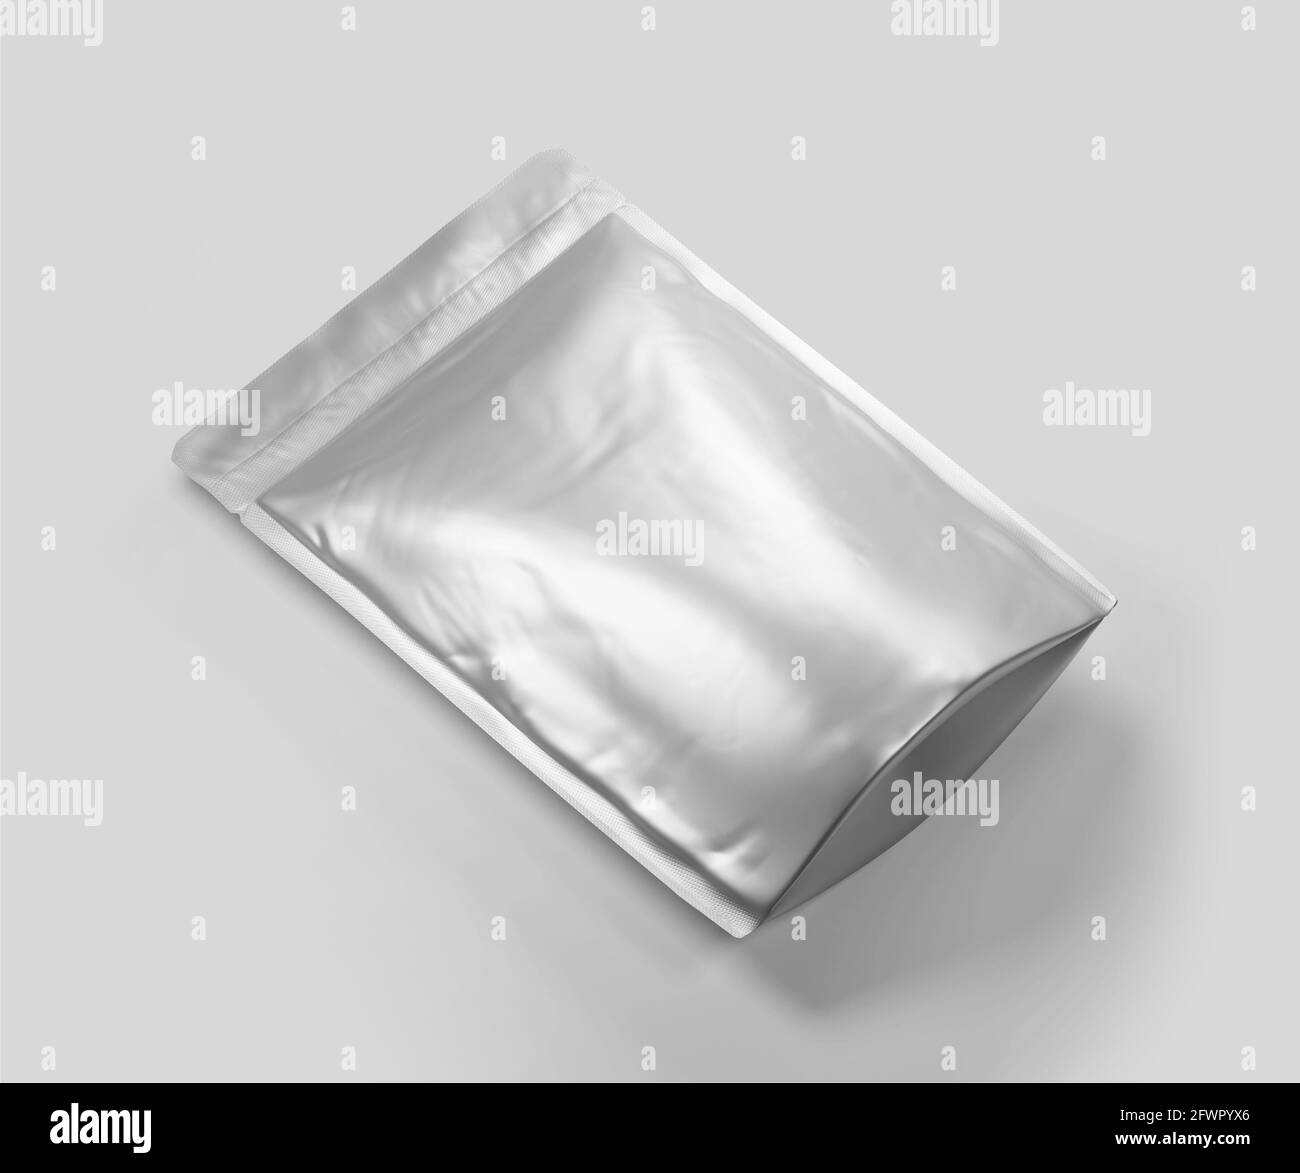 https://c8.alamy.com/comp/2FWPYX6/blank-foil-plastic-pouch-coffee-bag-white-aluminium-coffee-or-juice-package-3d-rendering-isolated-on-light-background-2FWPYX6.jpg